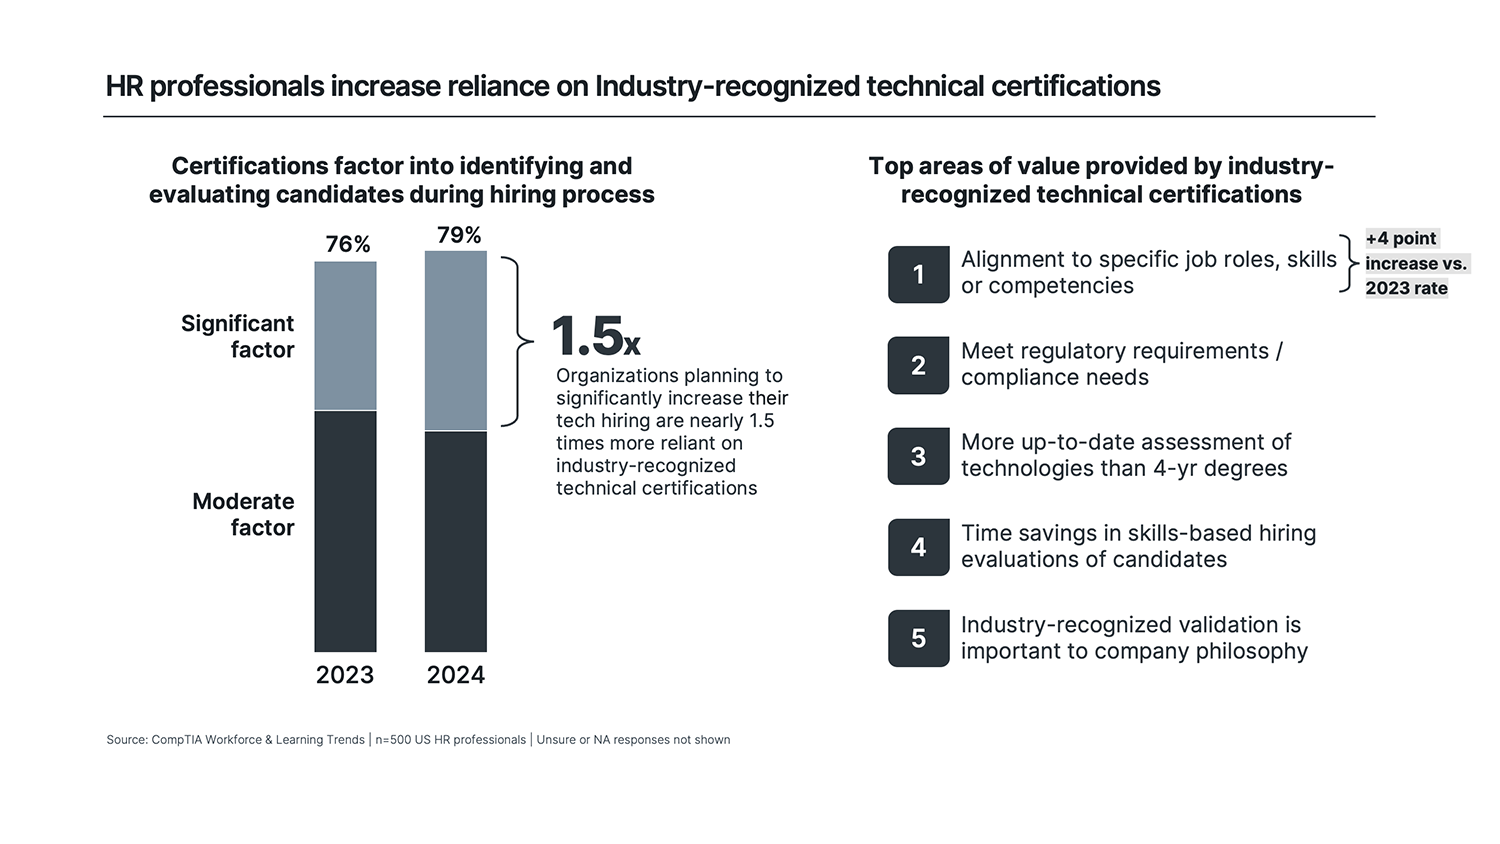 HR Professionals Increase Reliance on Industry-recognized technical certifications